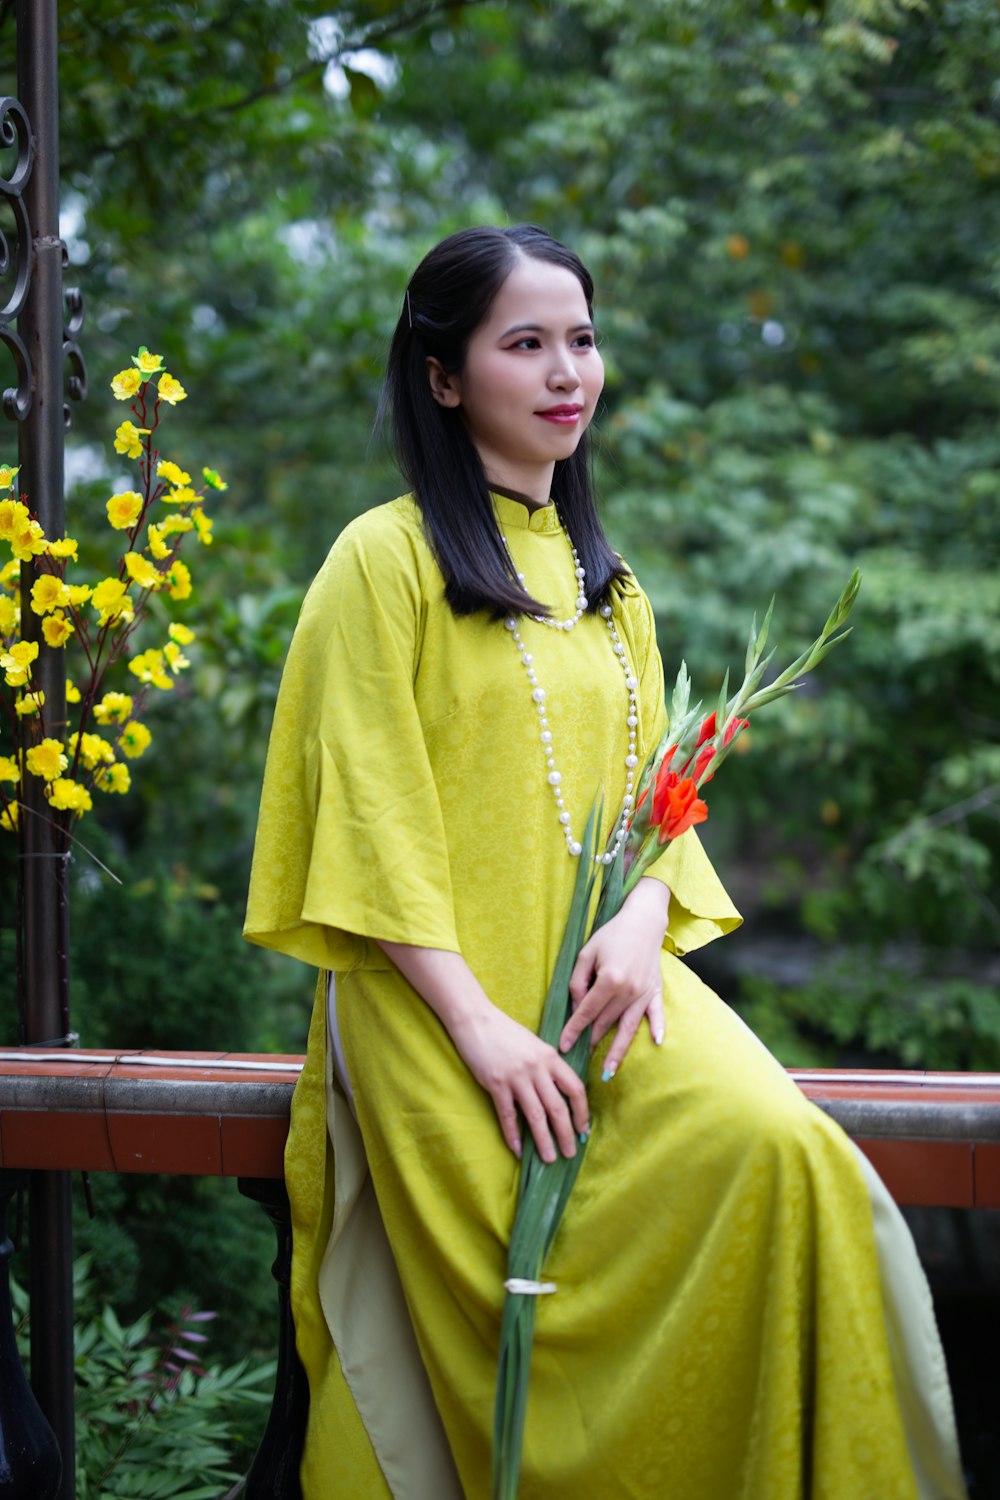 a woman in a yellow dress holding a bouquet of flowers